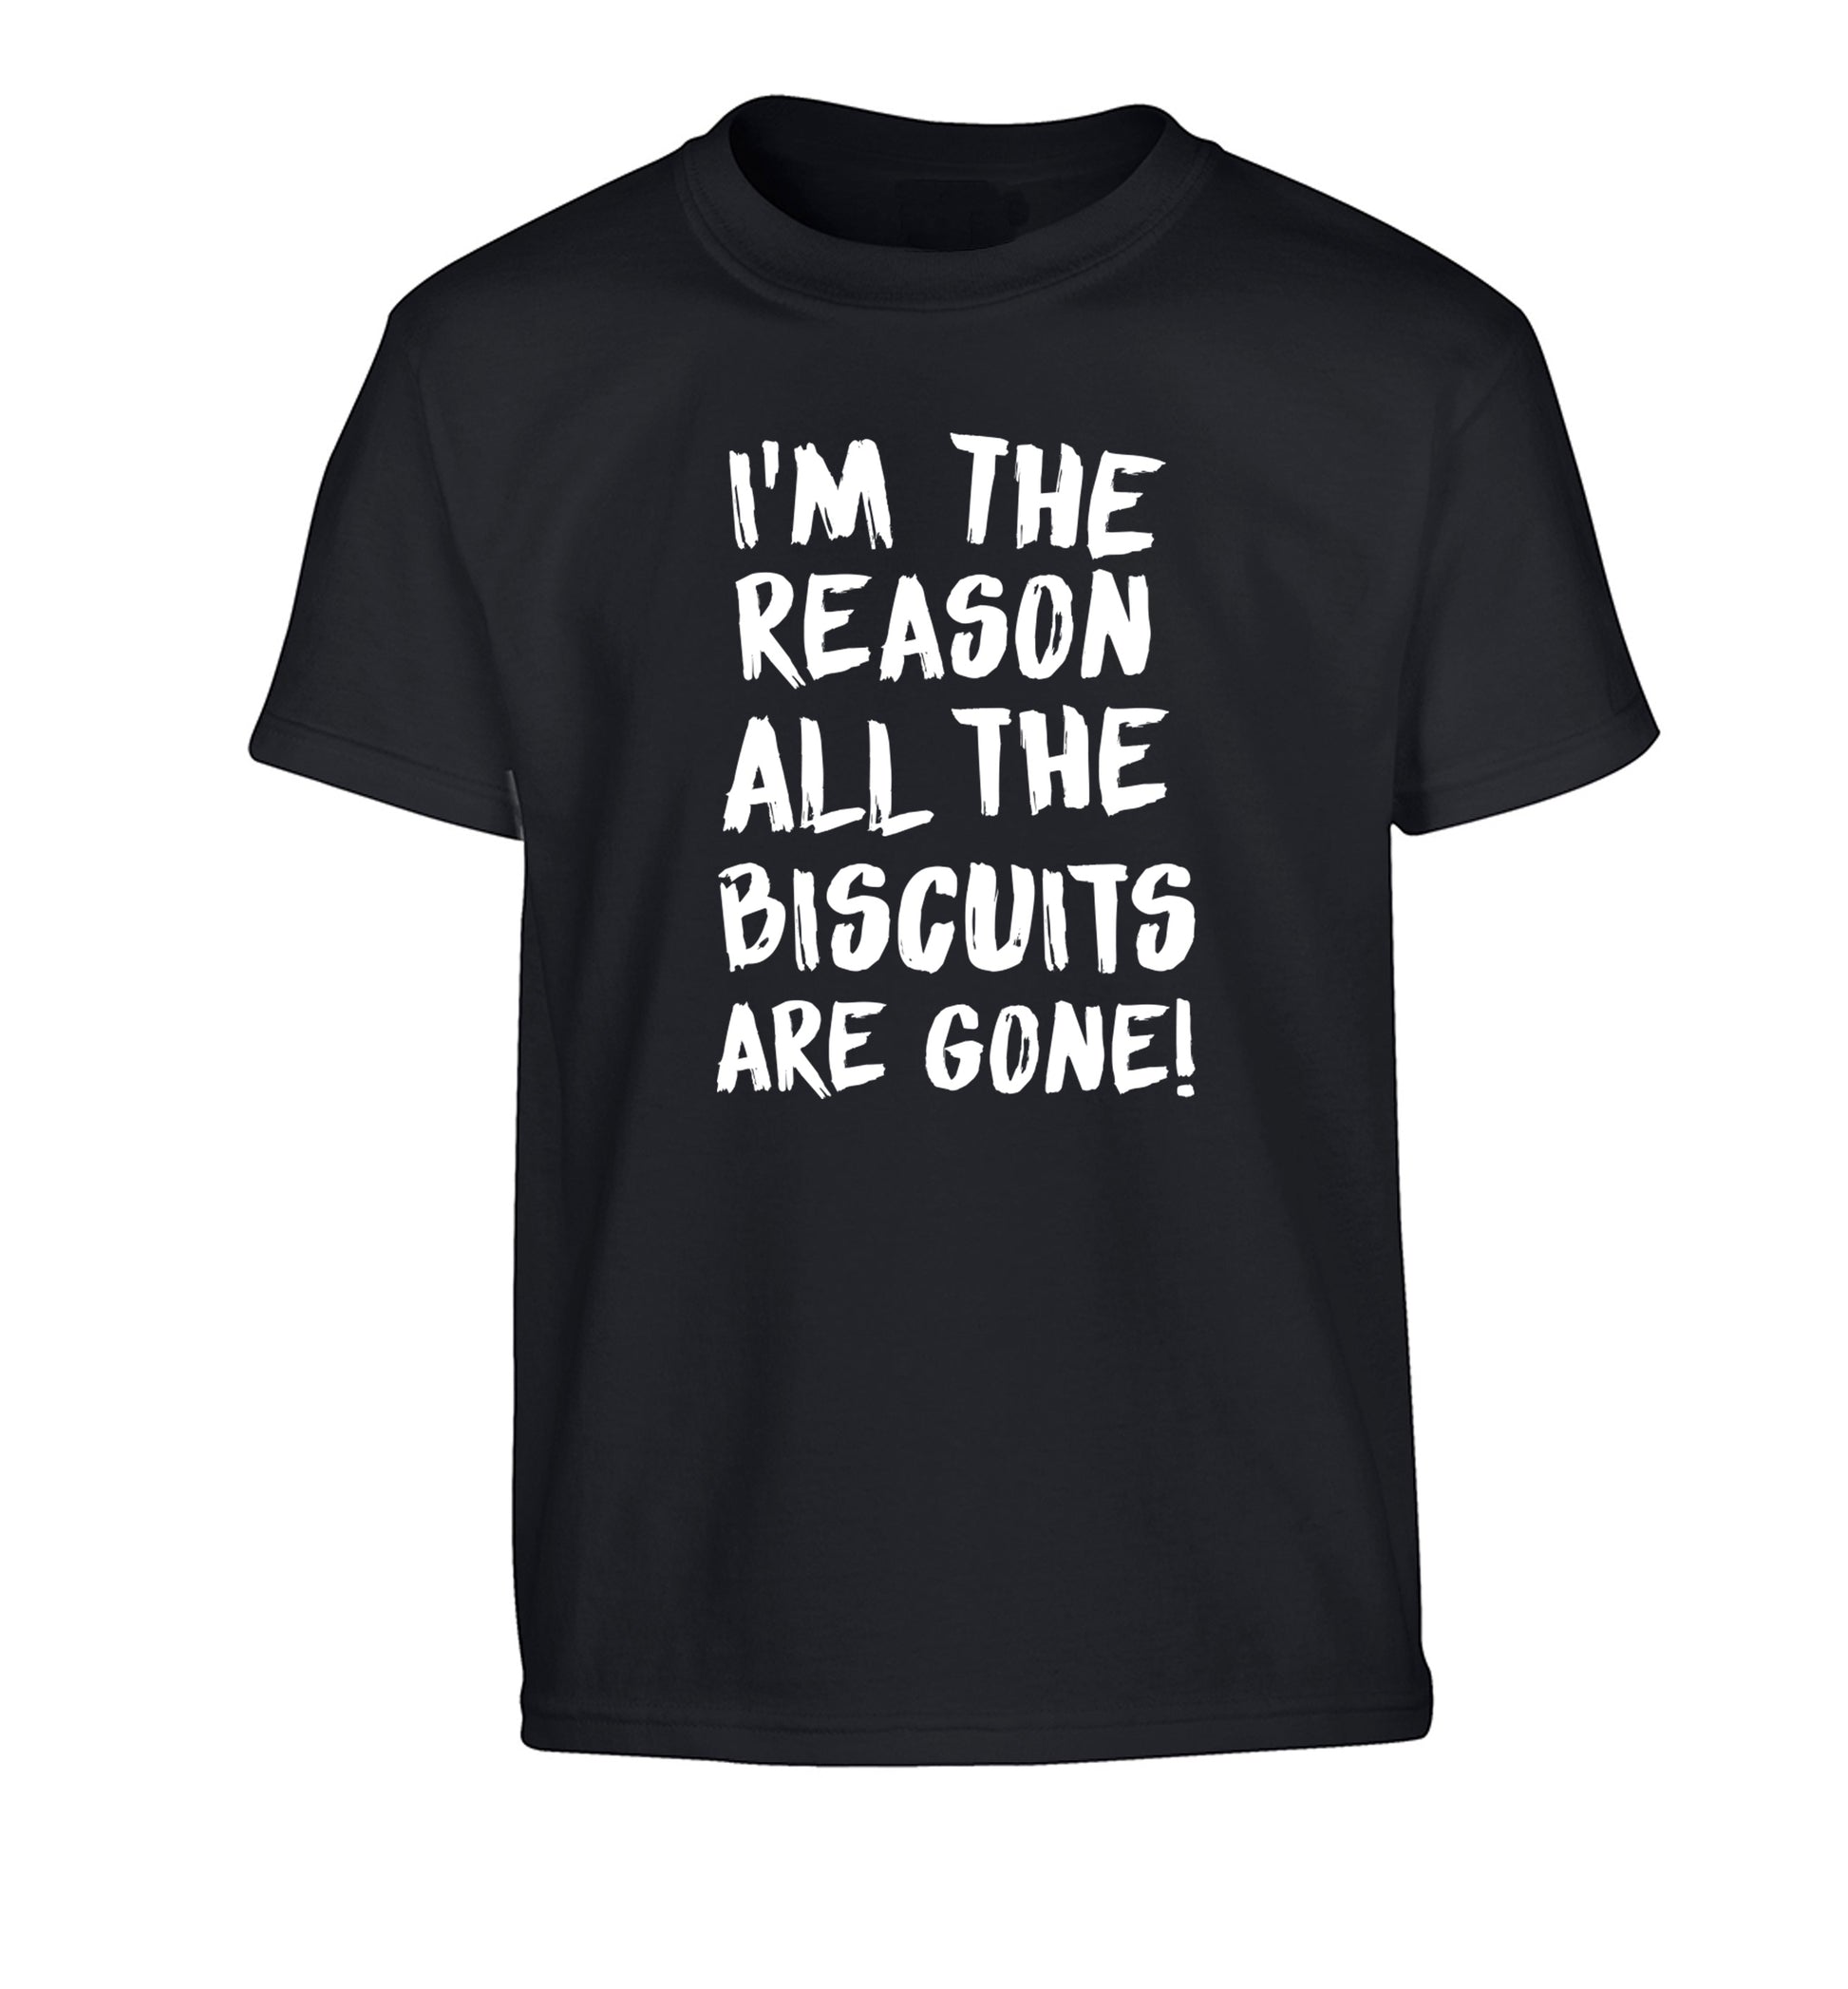 I'm the reason why all the biscuits are gone Children's black Tshirt 12-13 Years